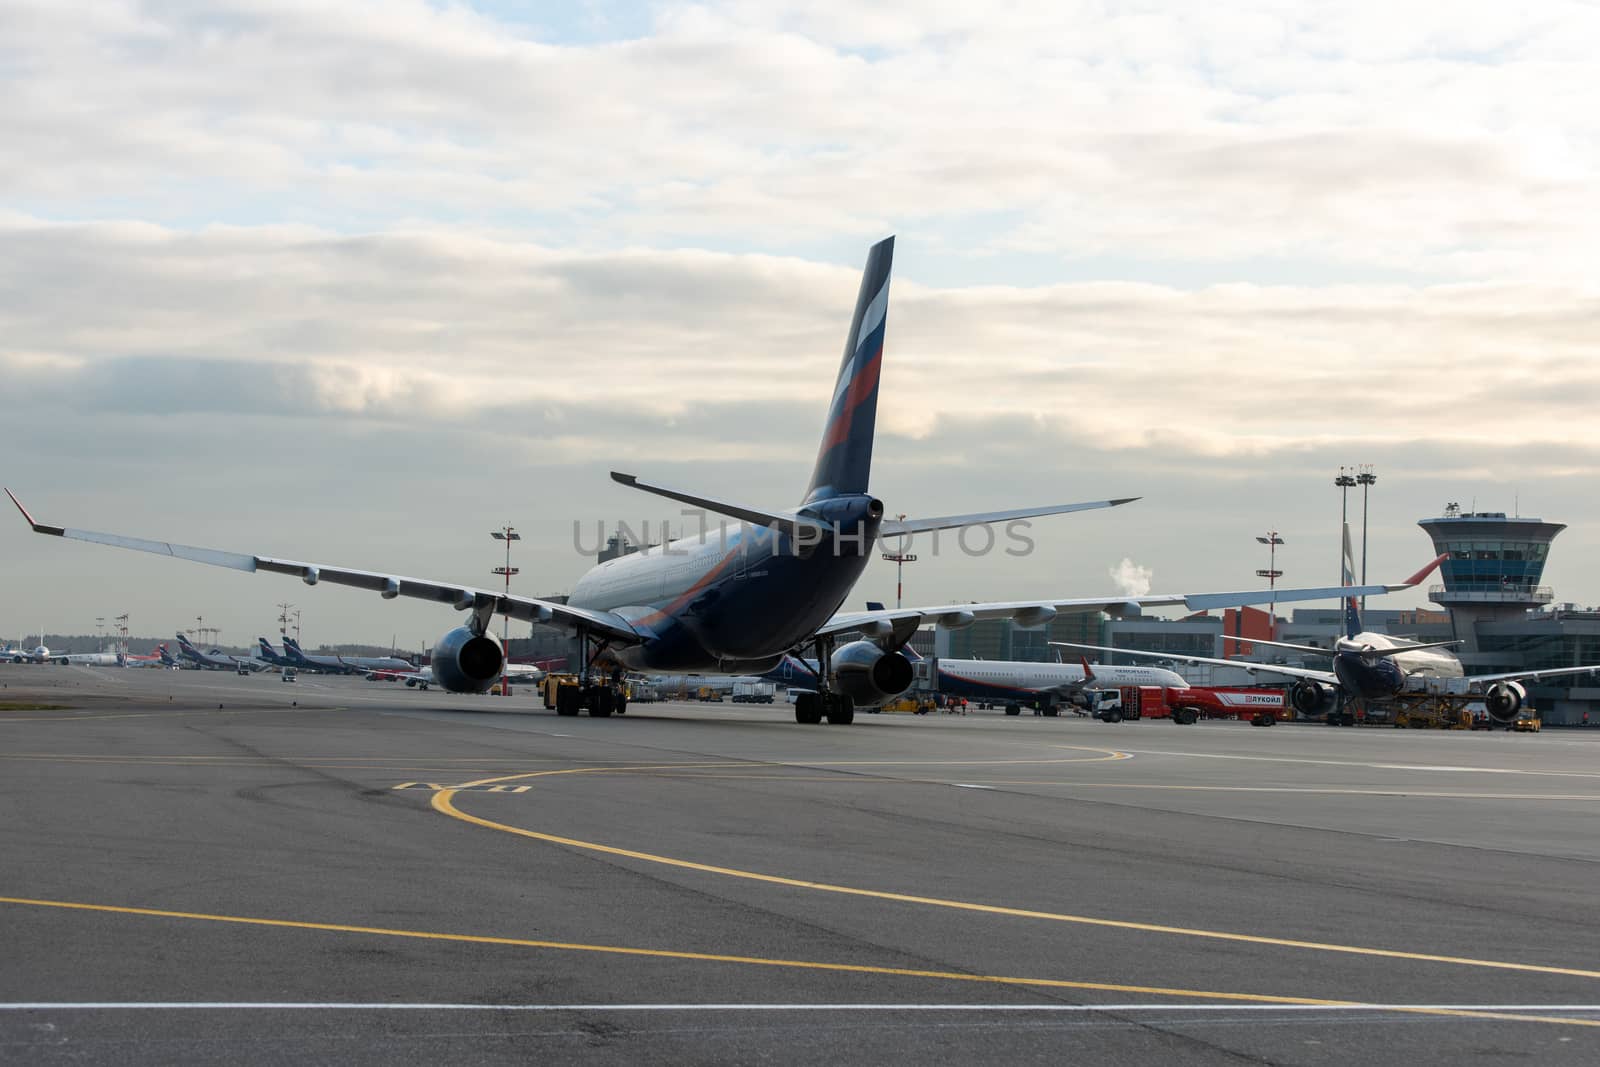 October 29, 2019, Moscow, Russia. Plane 
Airbus A330-200 Aeroflot - Russian Airlines at Sheremetyevo airport in Moscow.